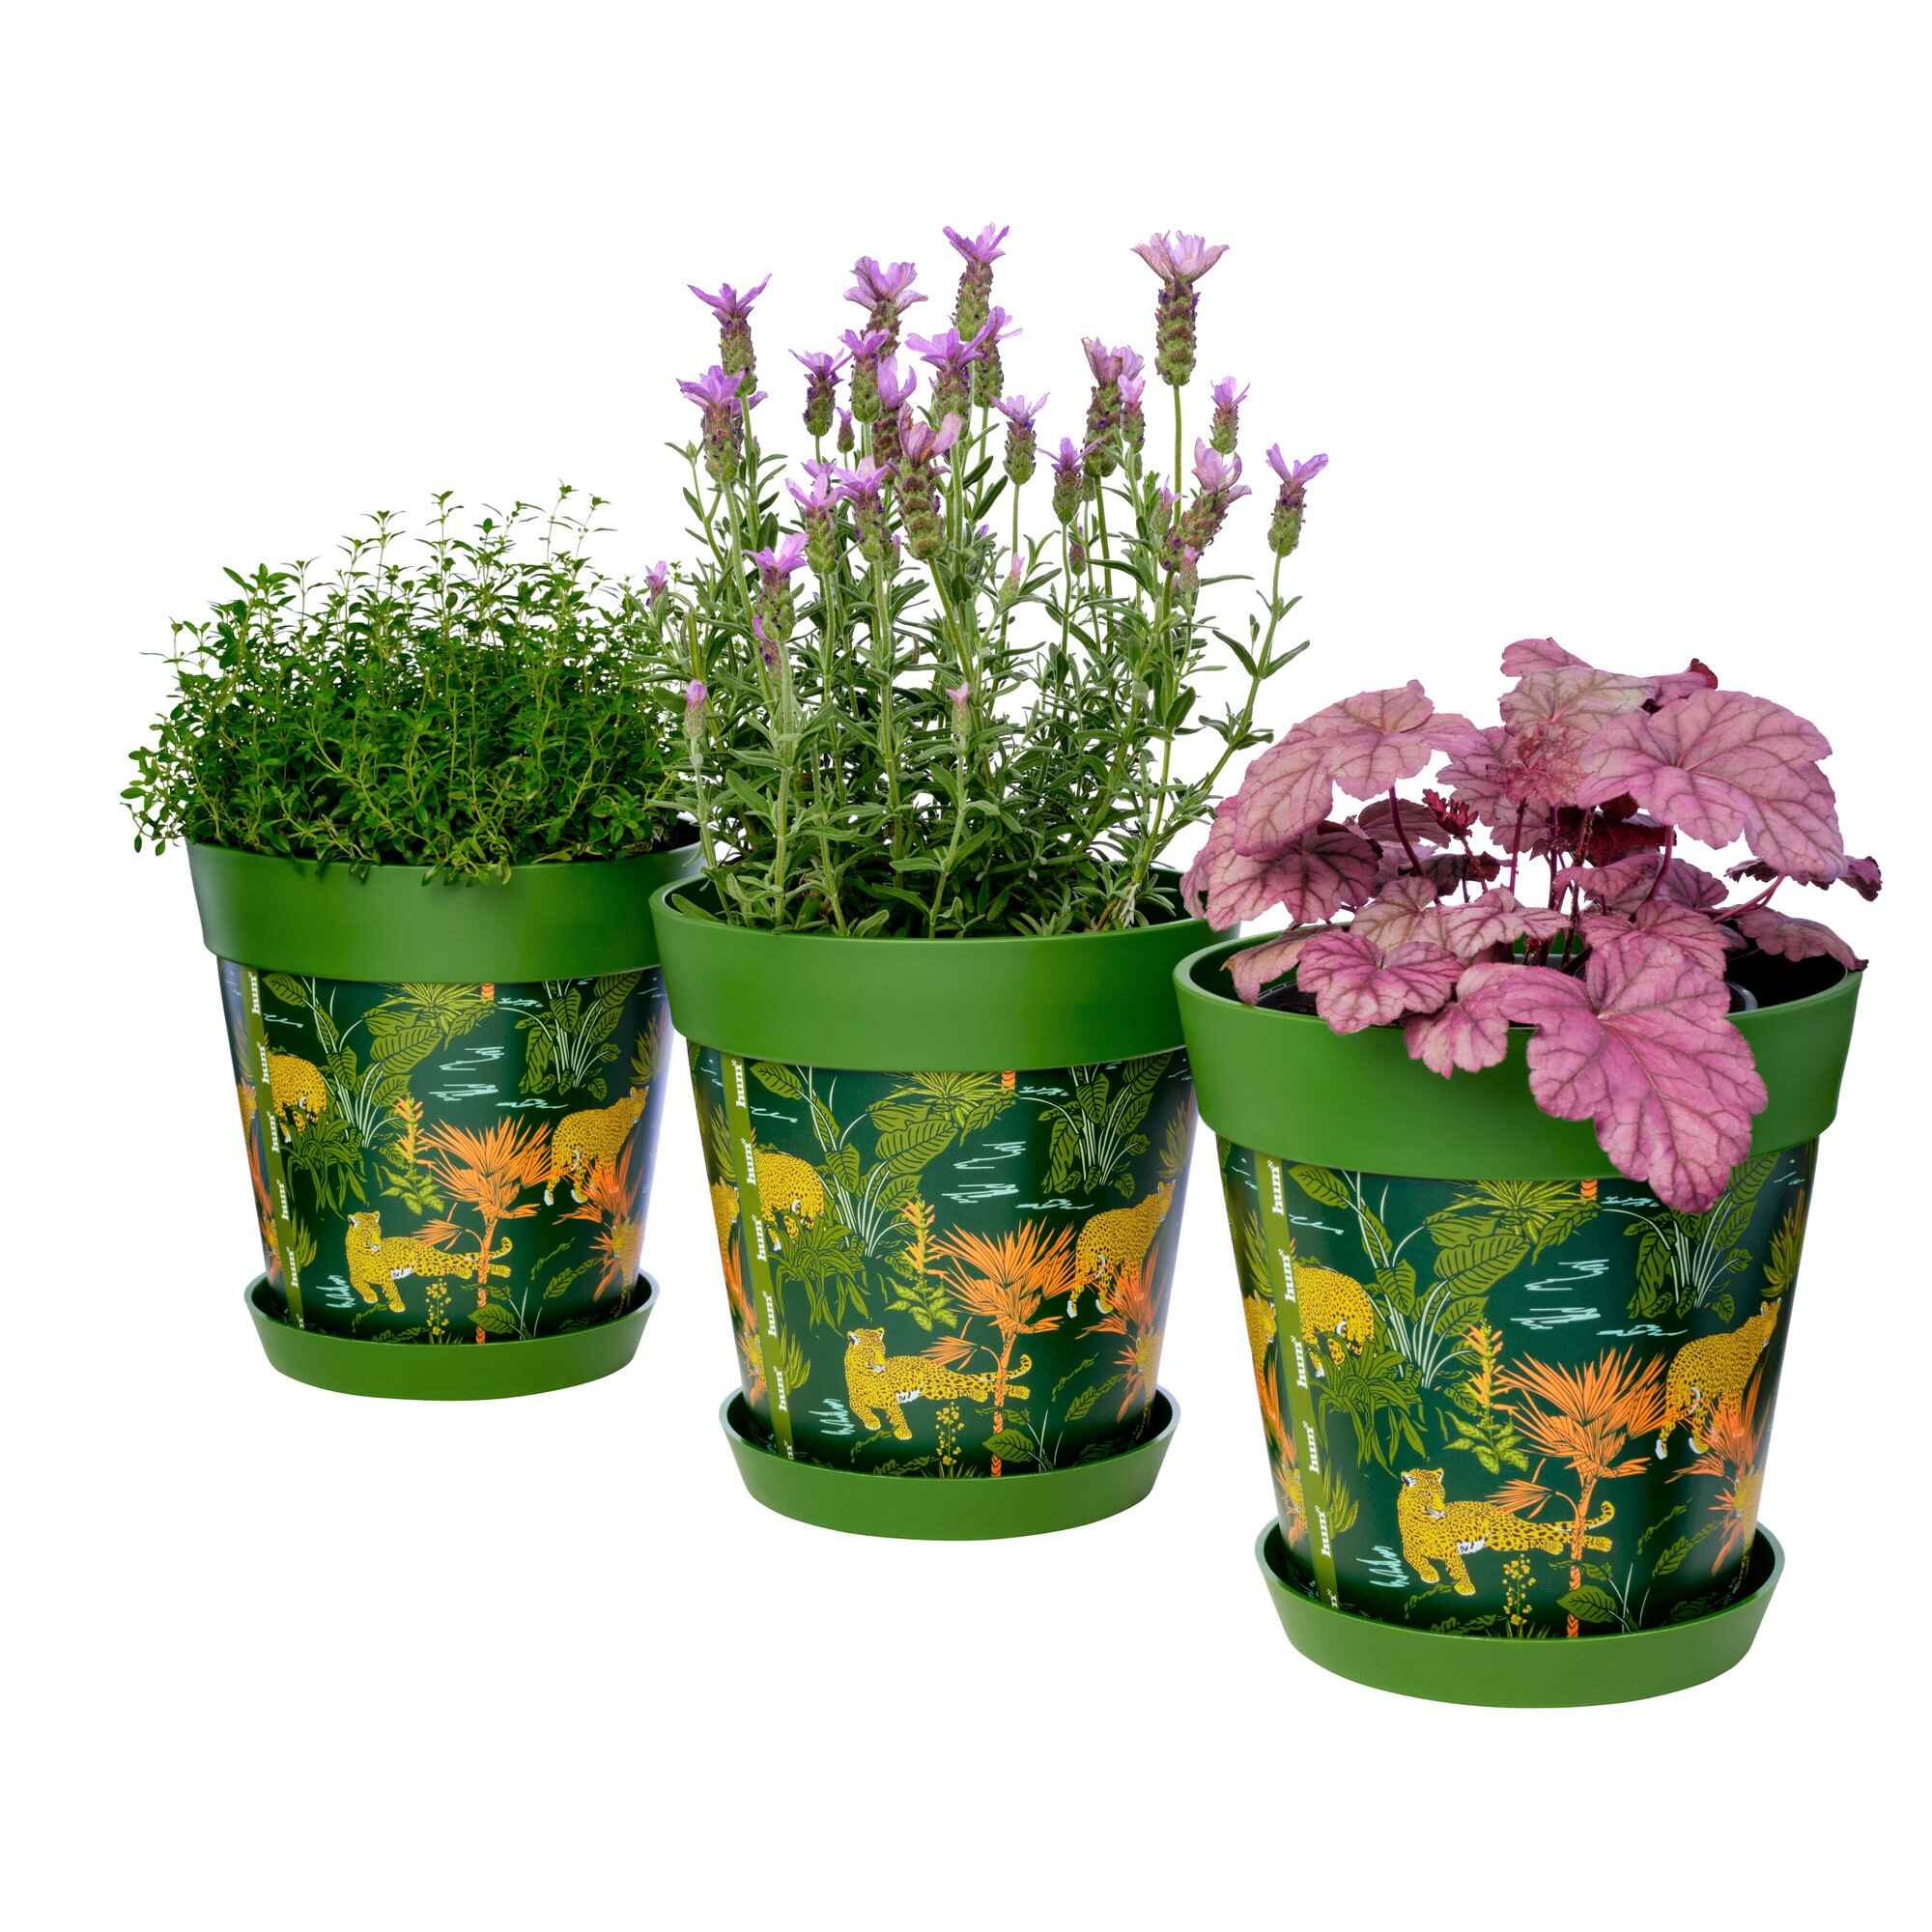 Picture of 3 Planted Medium 22cm Green Jungle and Leopard Pattern Indoor/Outdoor Flower Pot and Saucers 